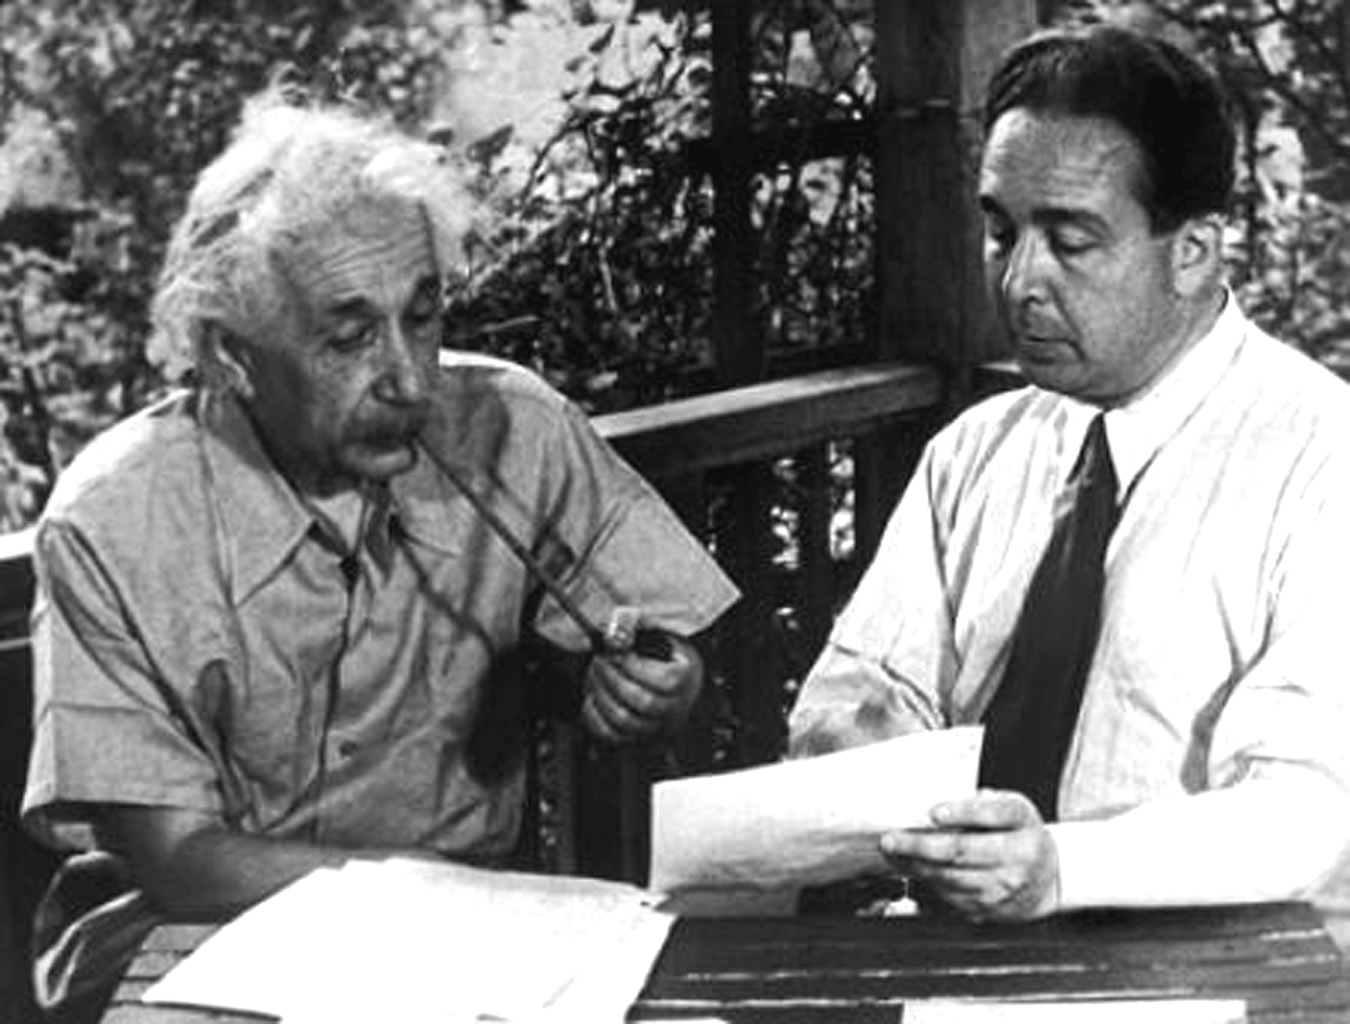 1948 staged photo of physicists Albert Einstein and Leó Szilárd recreating their collaboration on a 1939 letter to Franklin Roosevelt urging the development of atomic weapons.